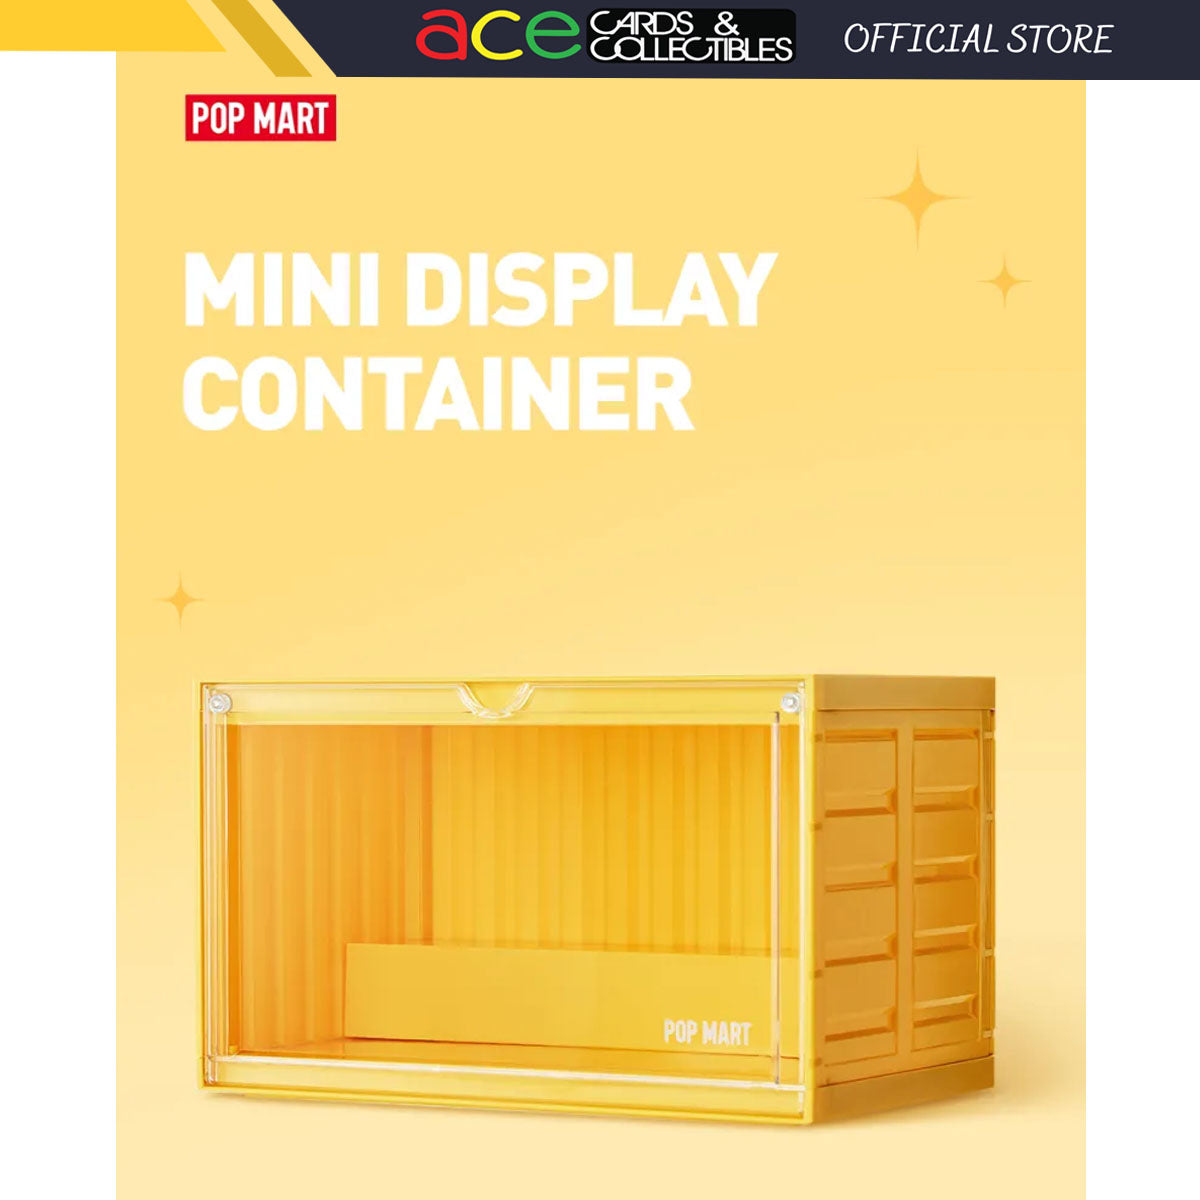 POP MART Mini Display Container (Yellow)-Pop Mart-Ace Cards &amp; Collectibles